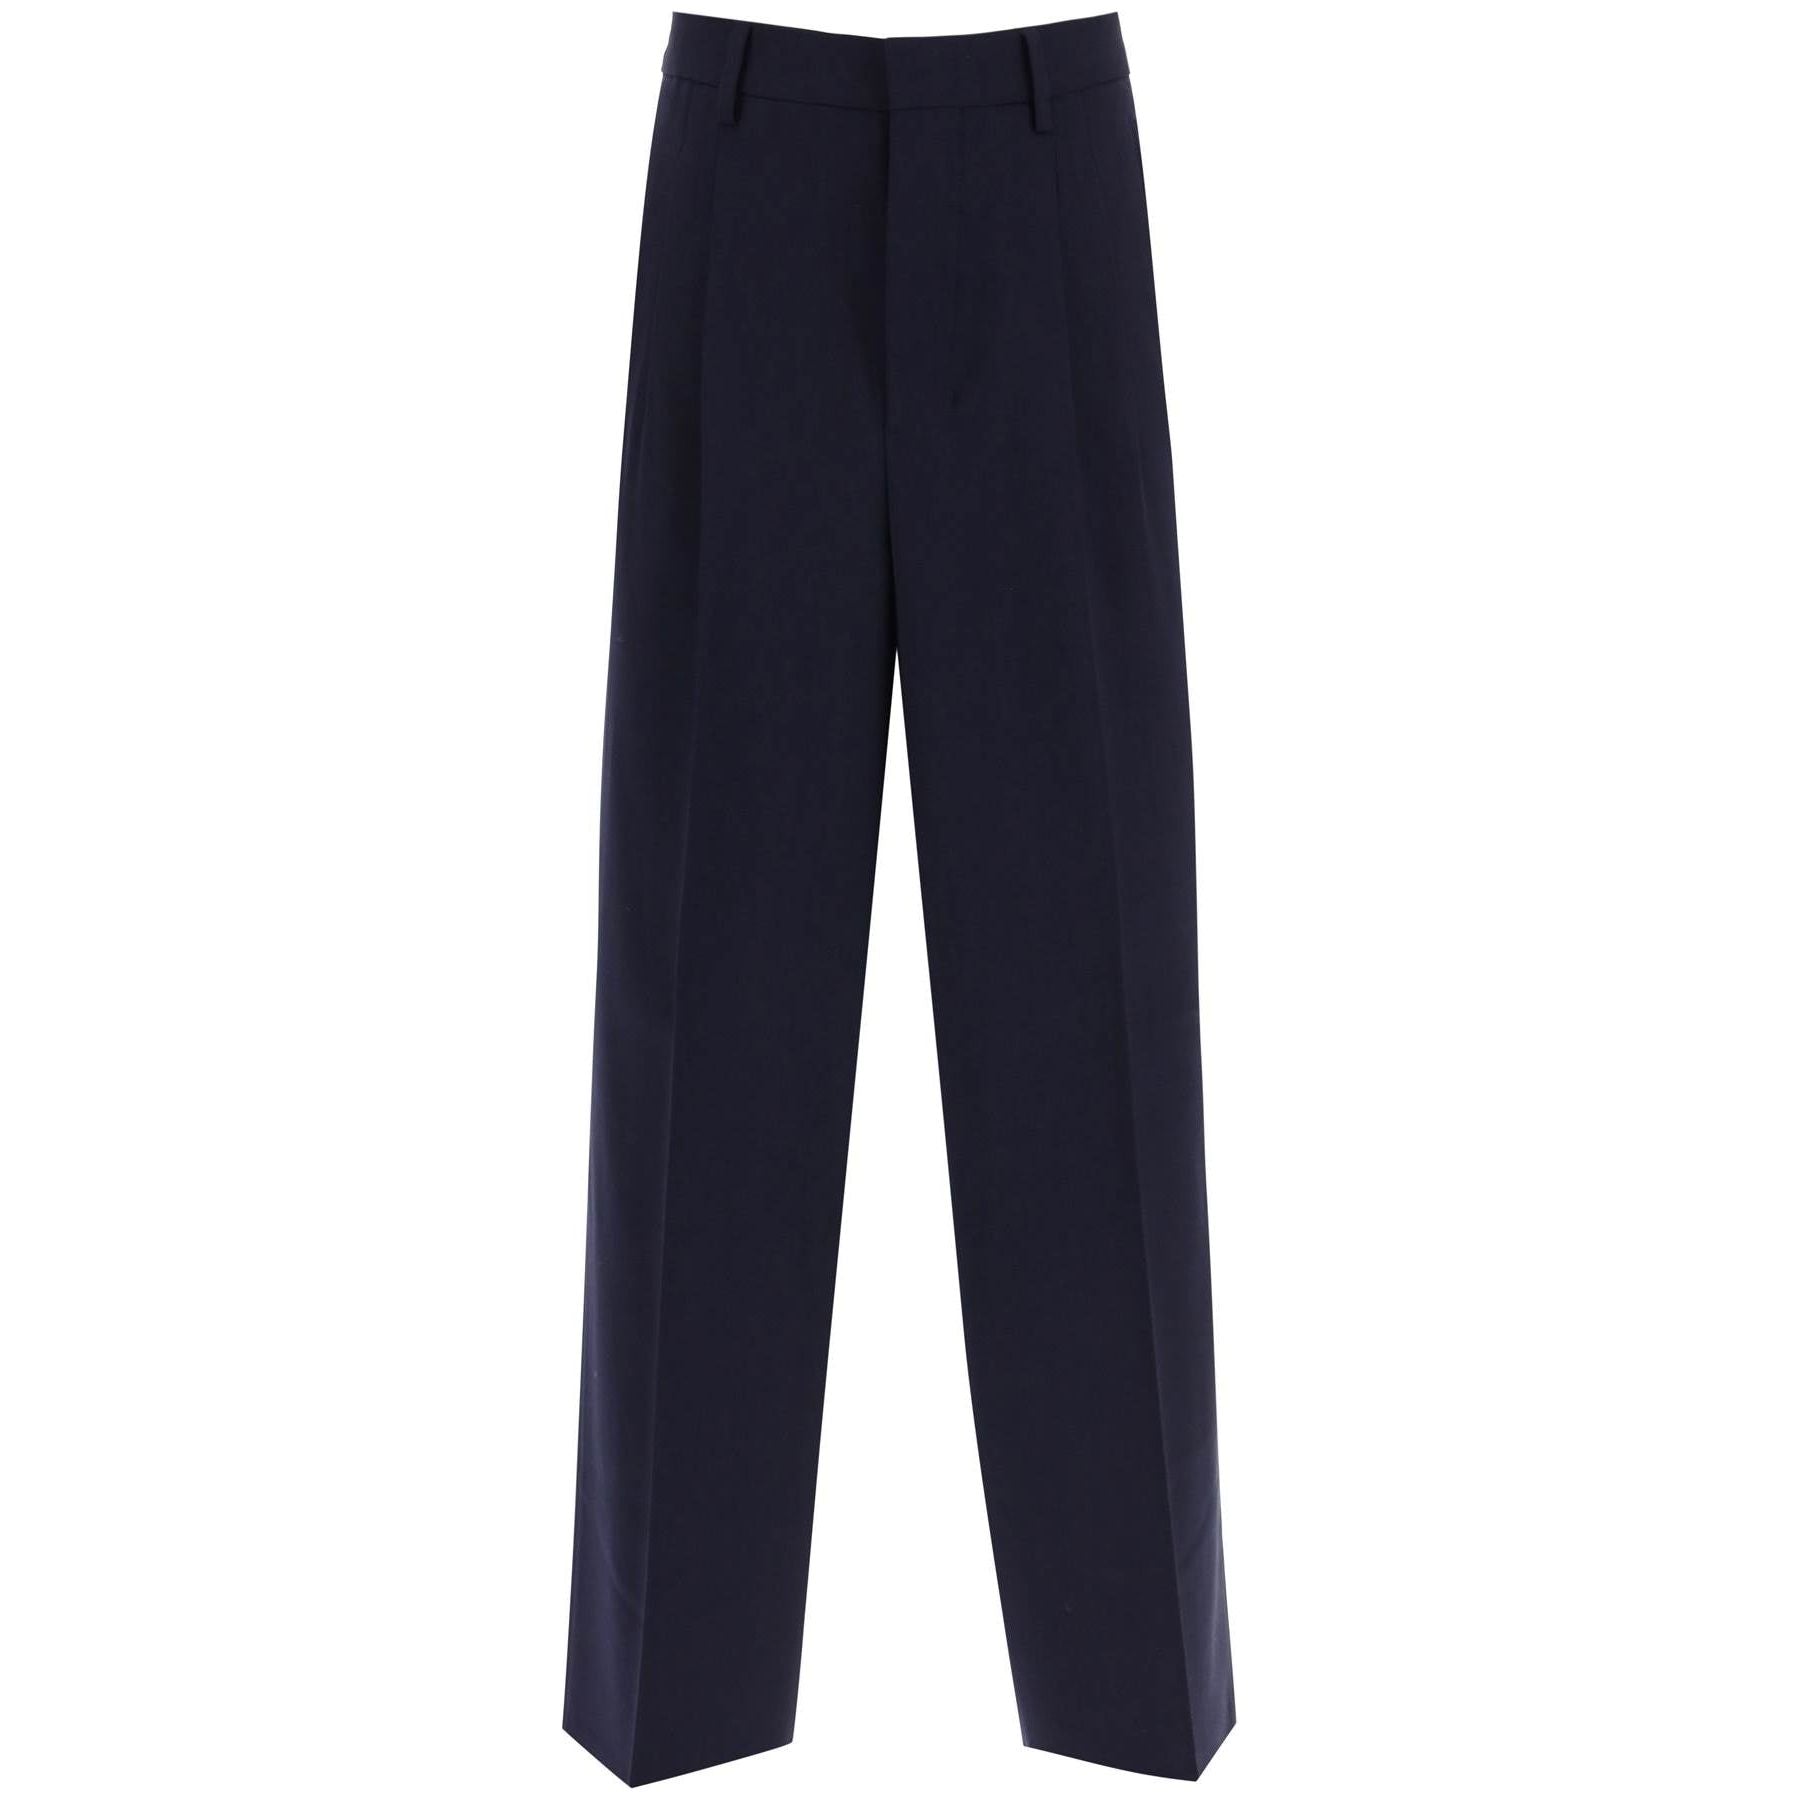 Virgin Wool Blend Loose Fit Pants with Straight Cut